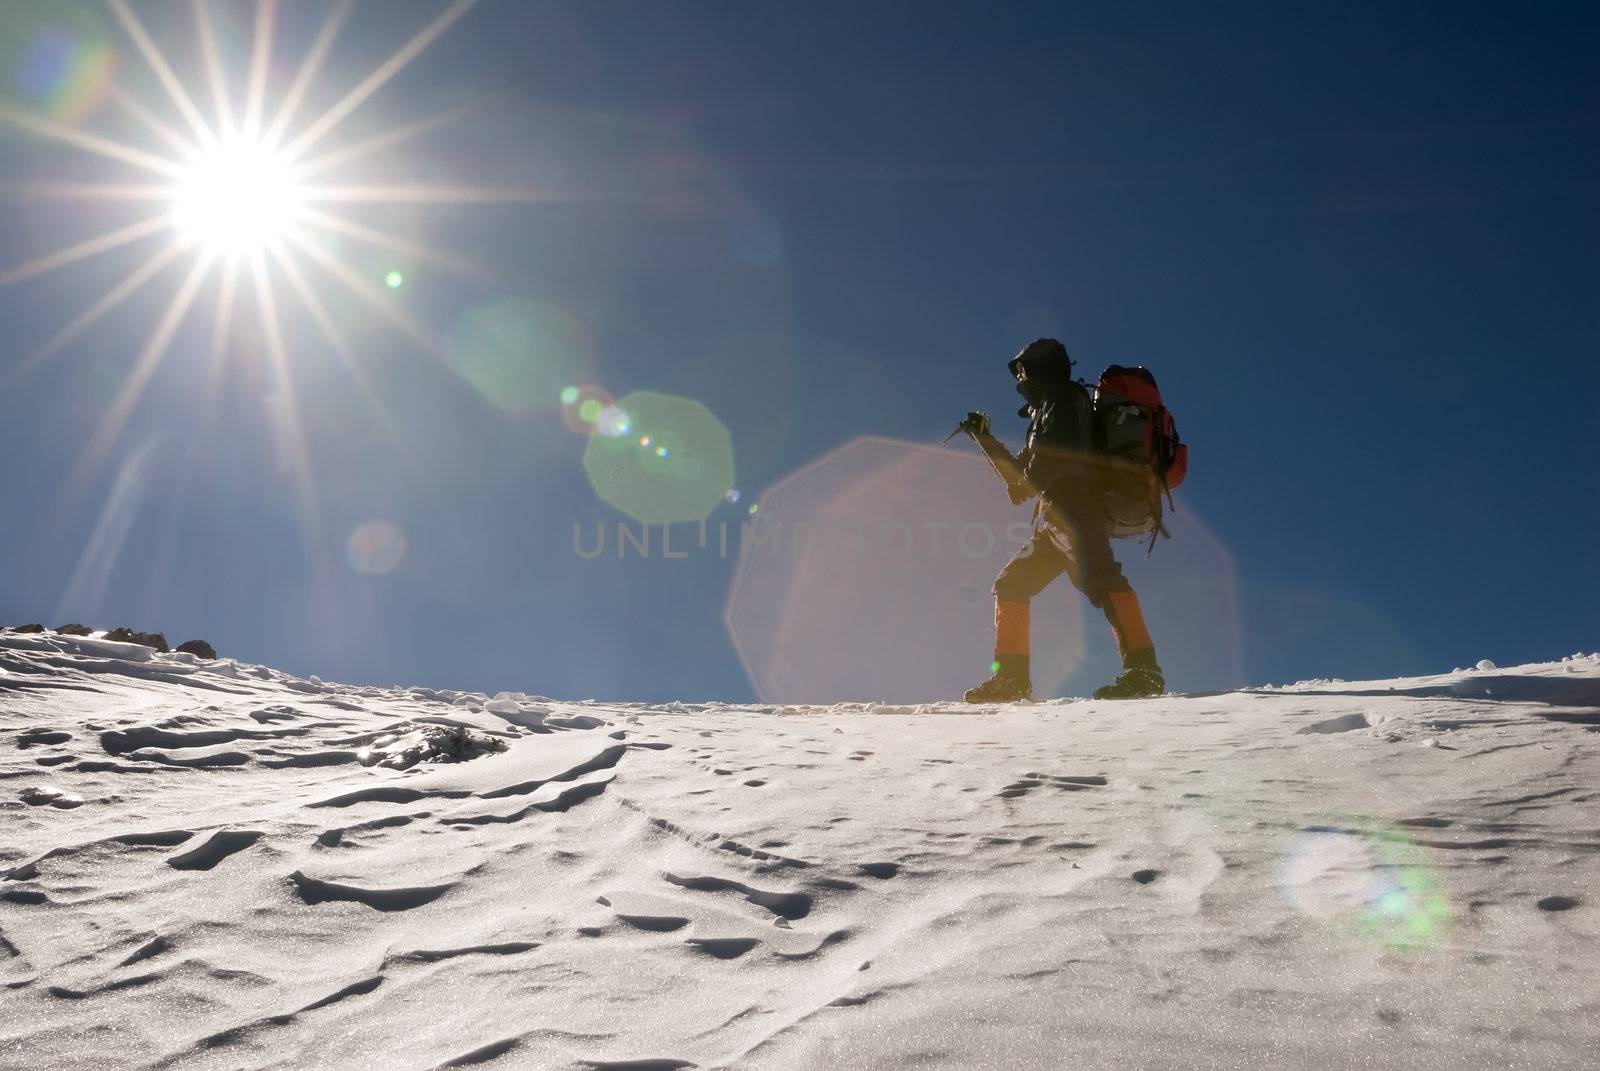 Man of mountain climber walk in snow winter day with sun light flare.